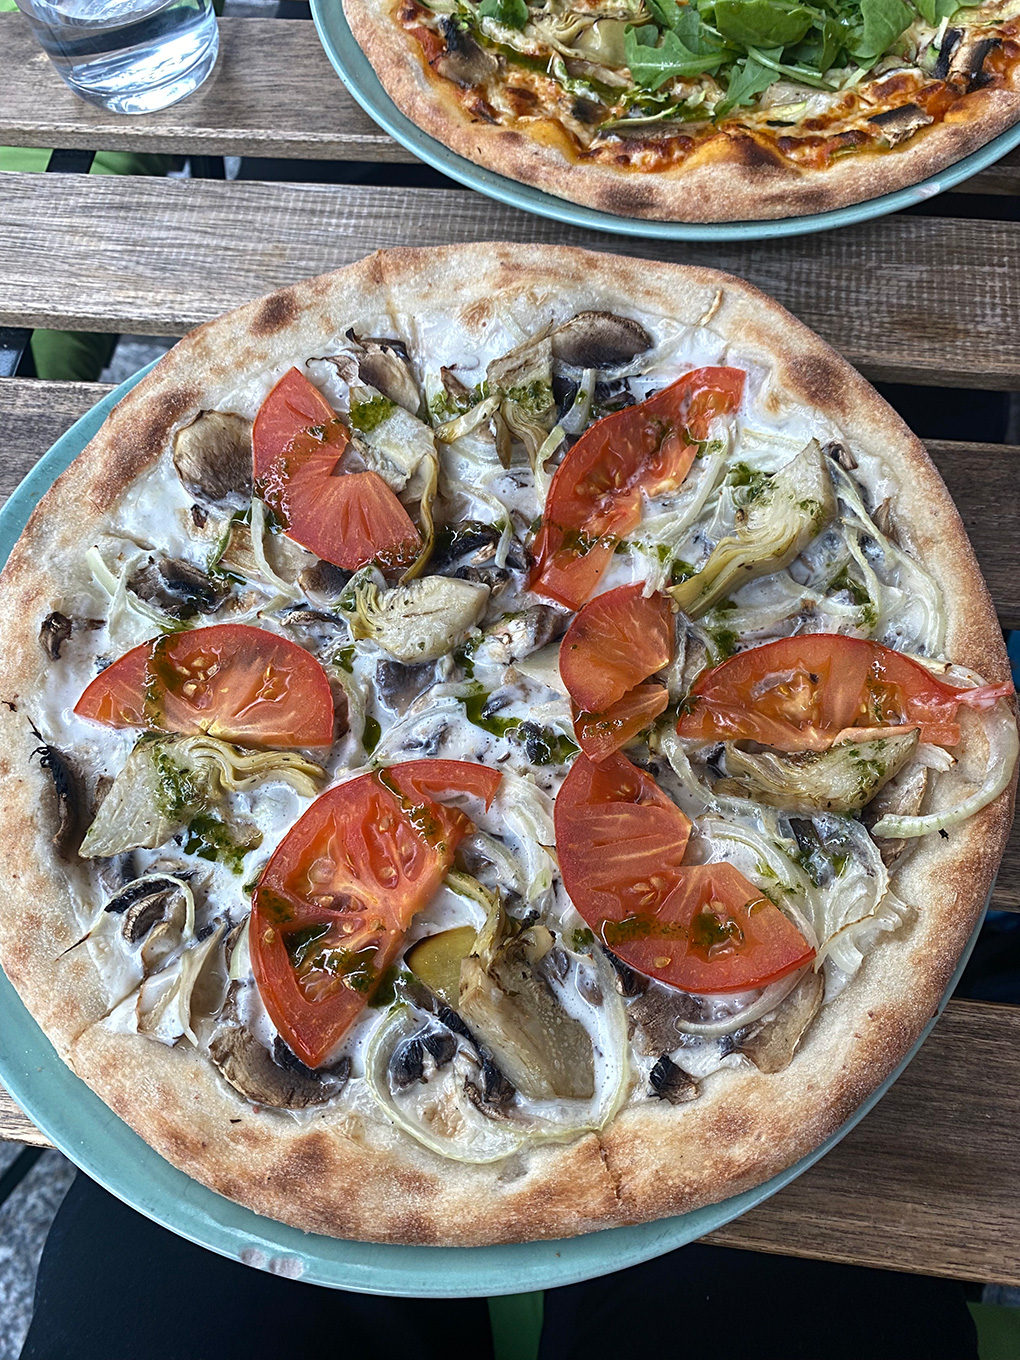 Pizza from France (Dairy-Free, Egg-Free, Nut-Free)